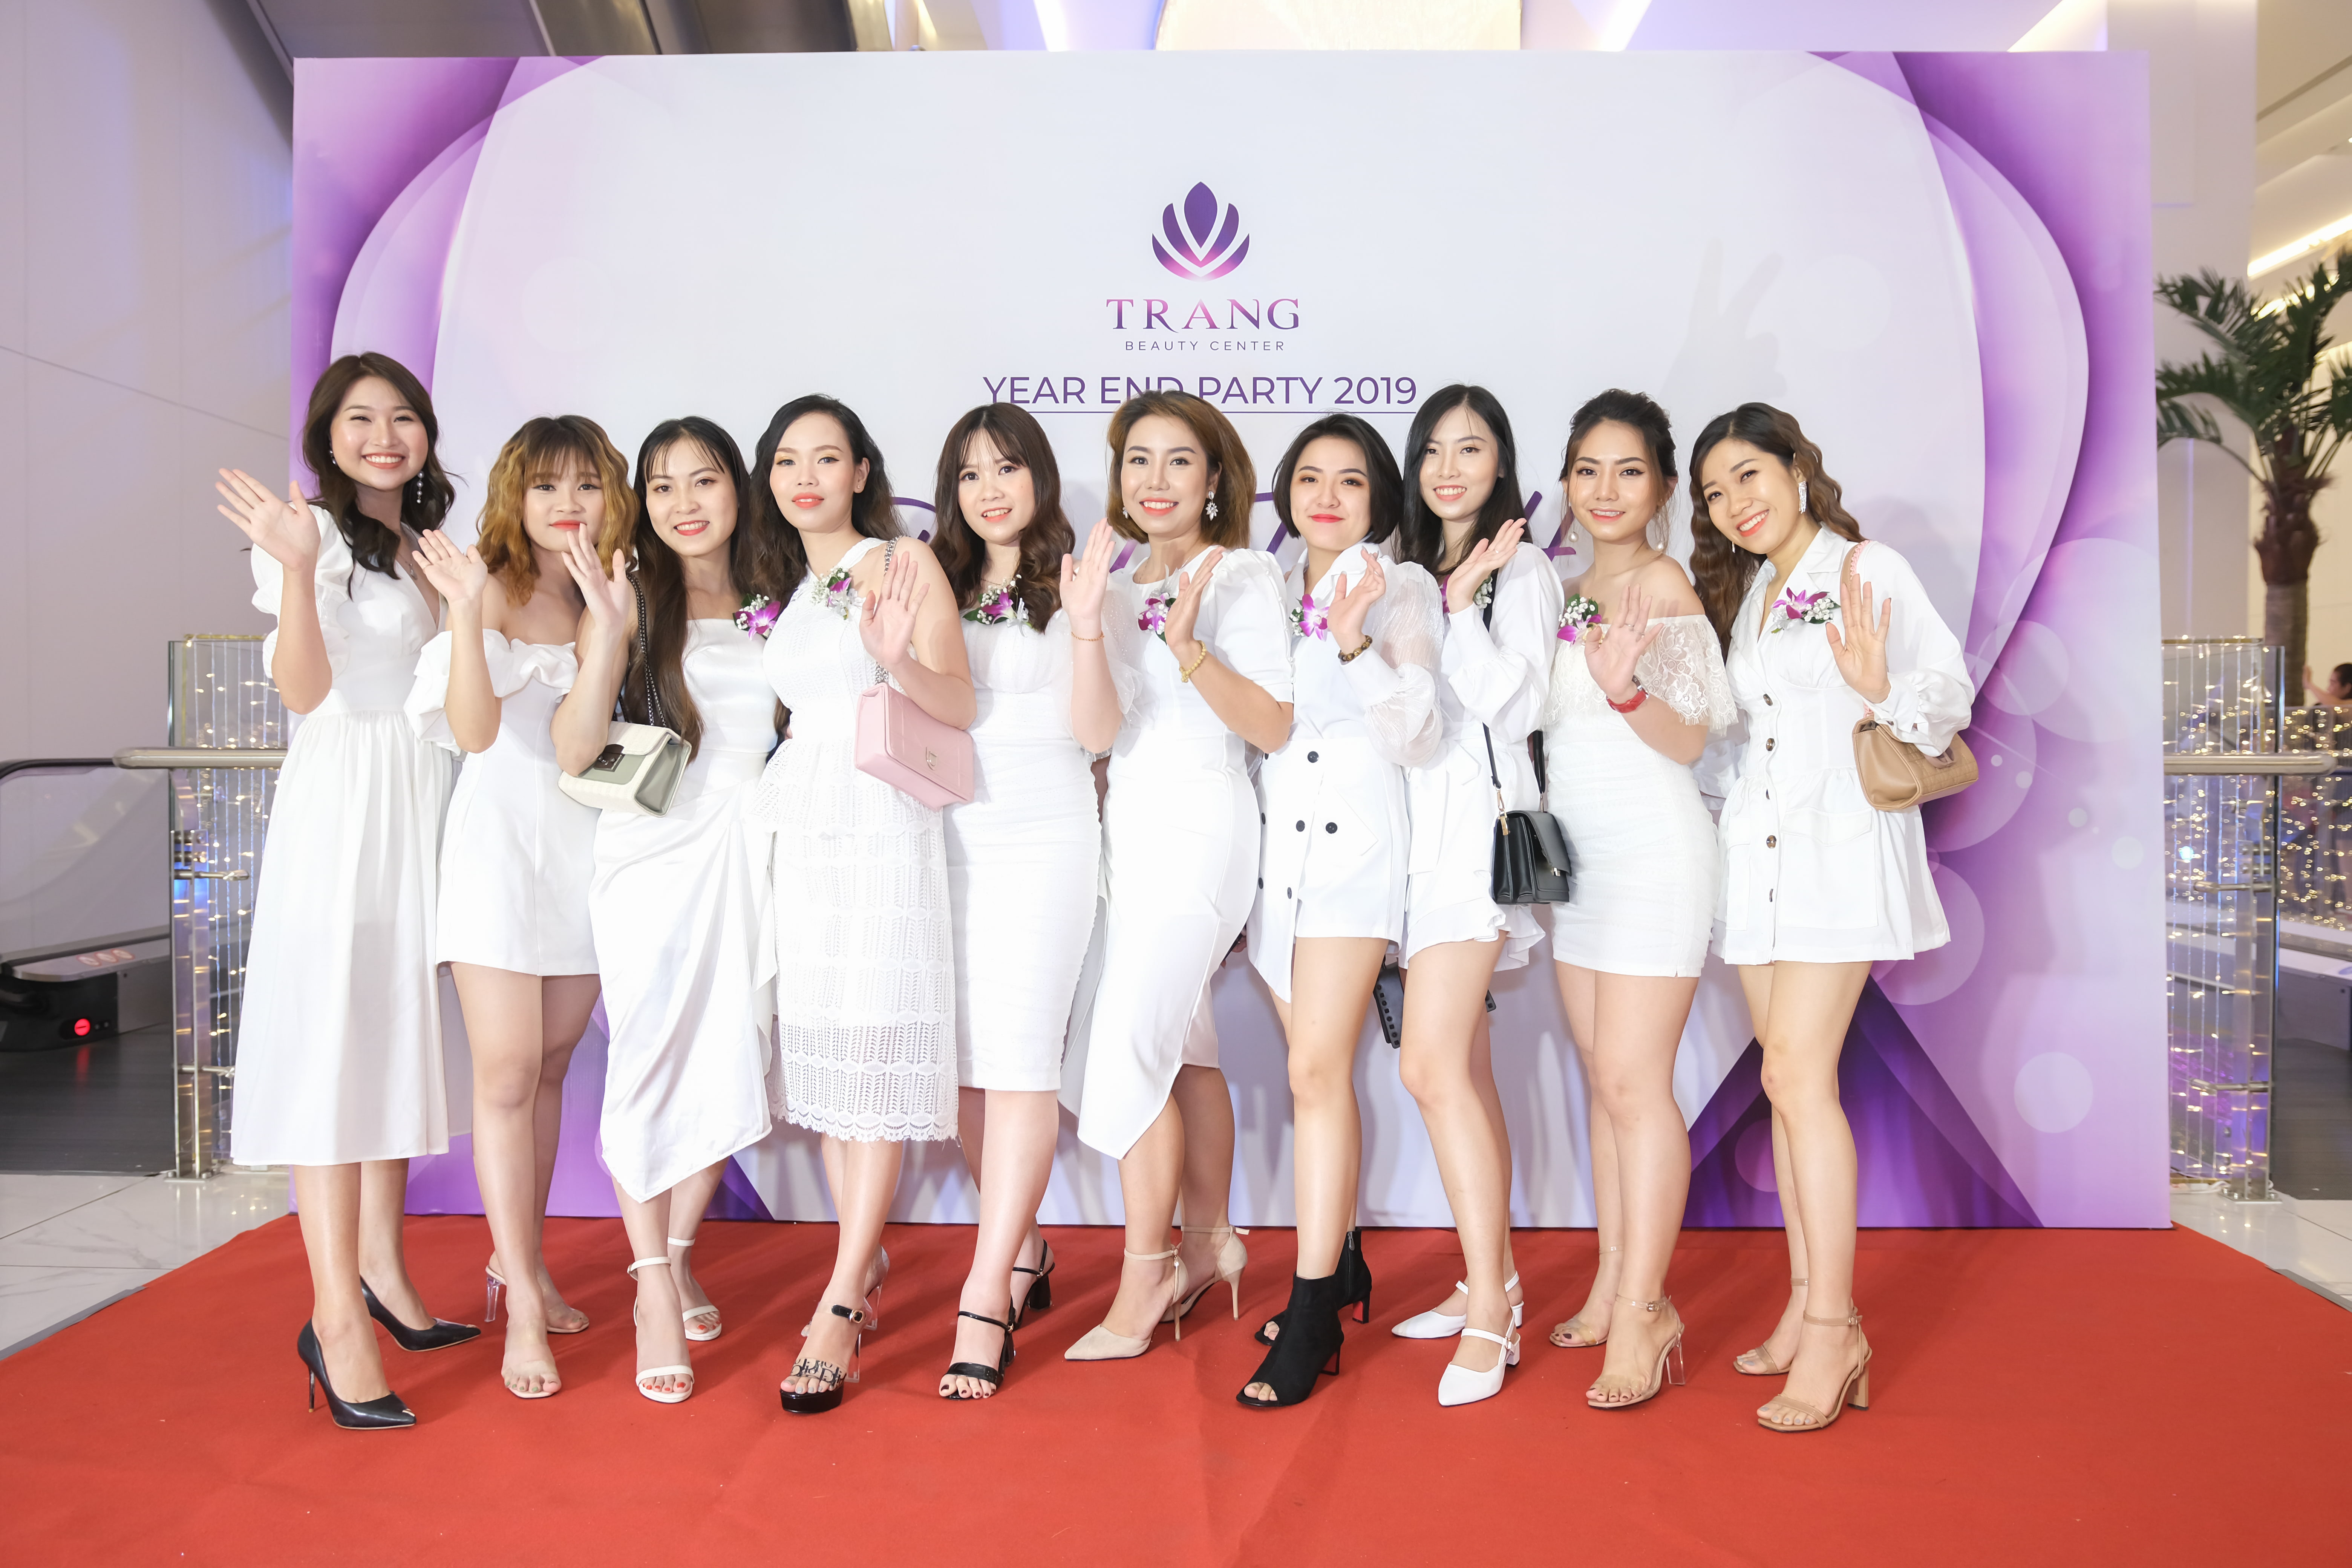 Sự Kiện Year End Party Trang Beauty Center - Stand Together